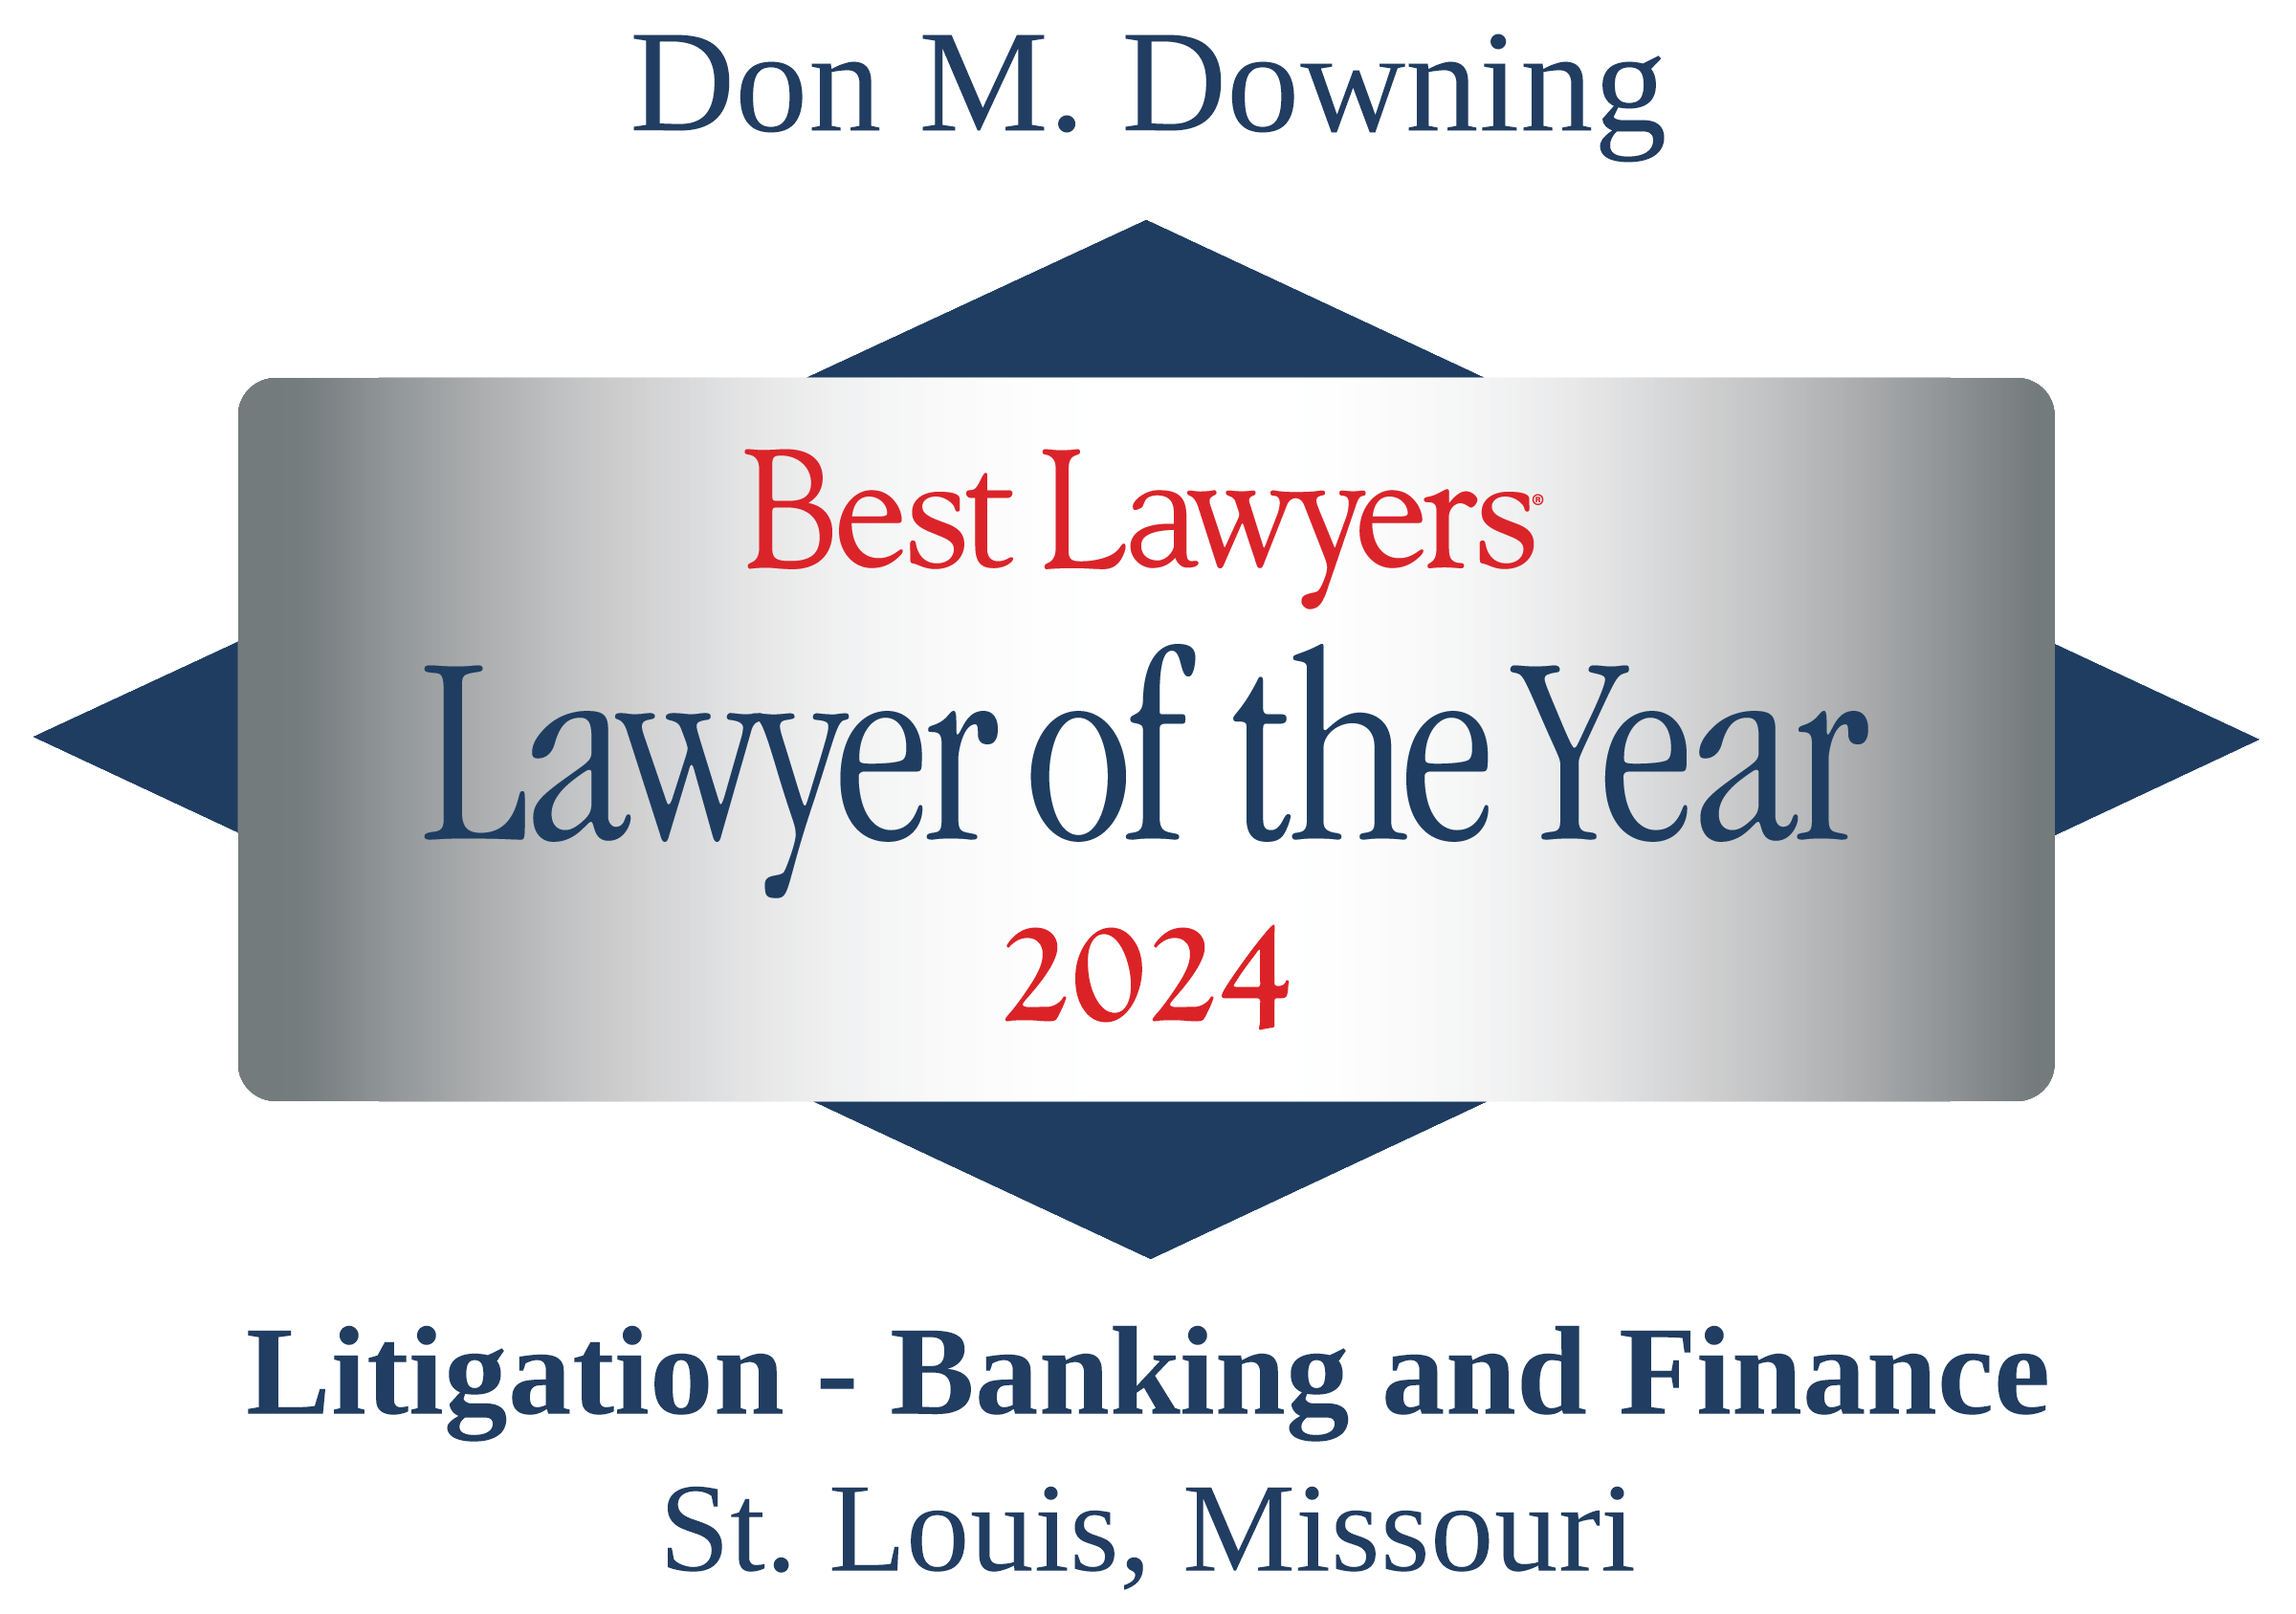 Don Downing Lawyer of the Year 2024